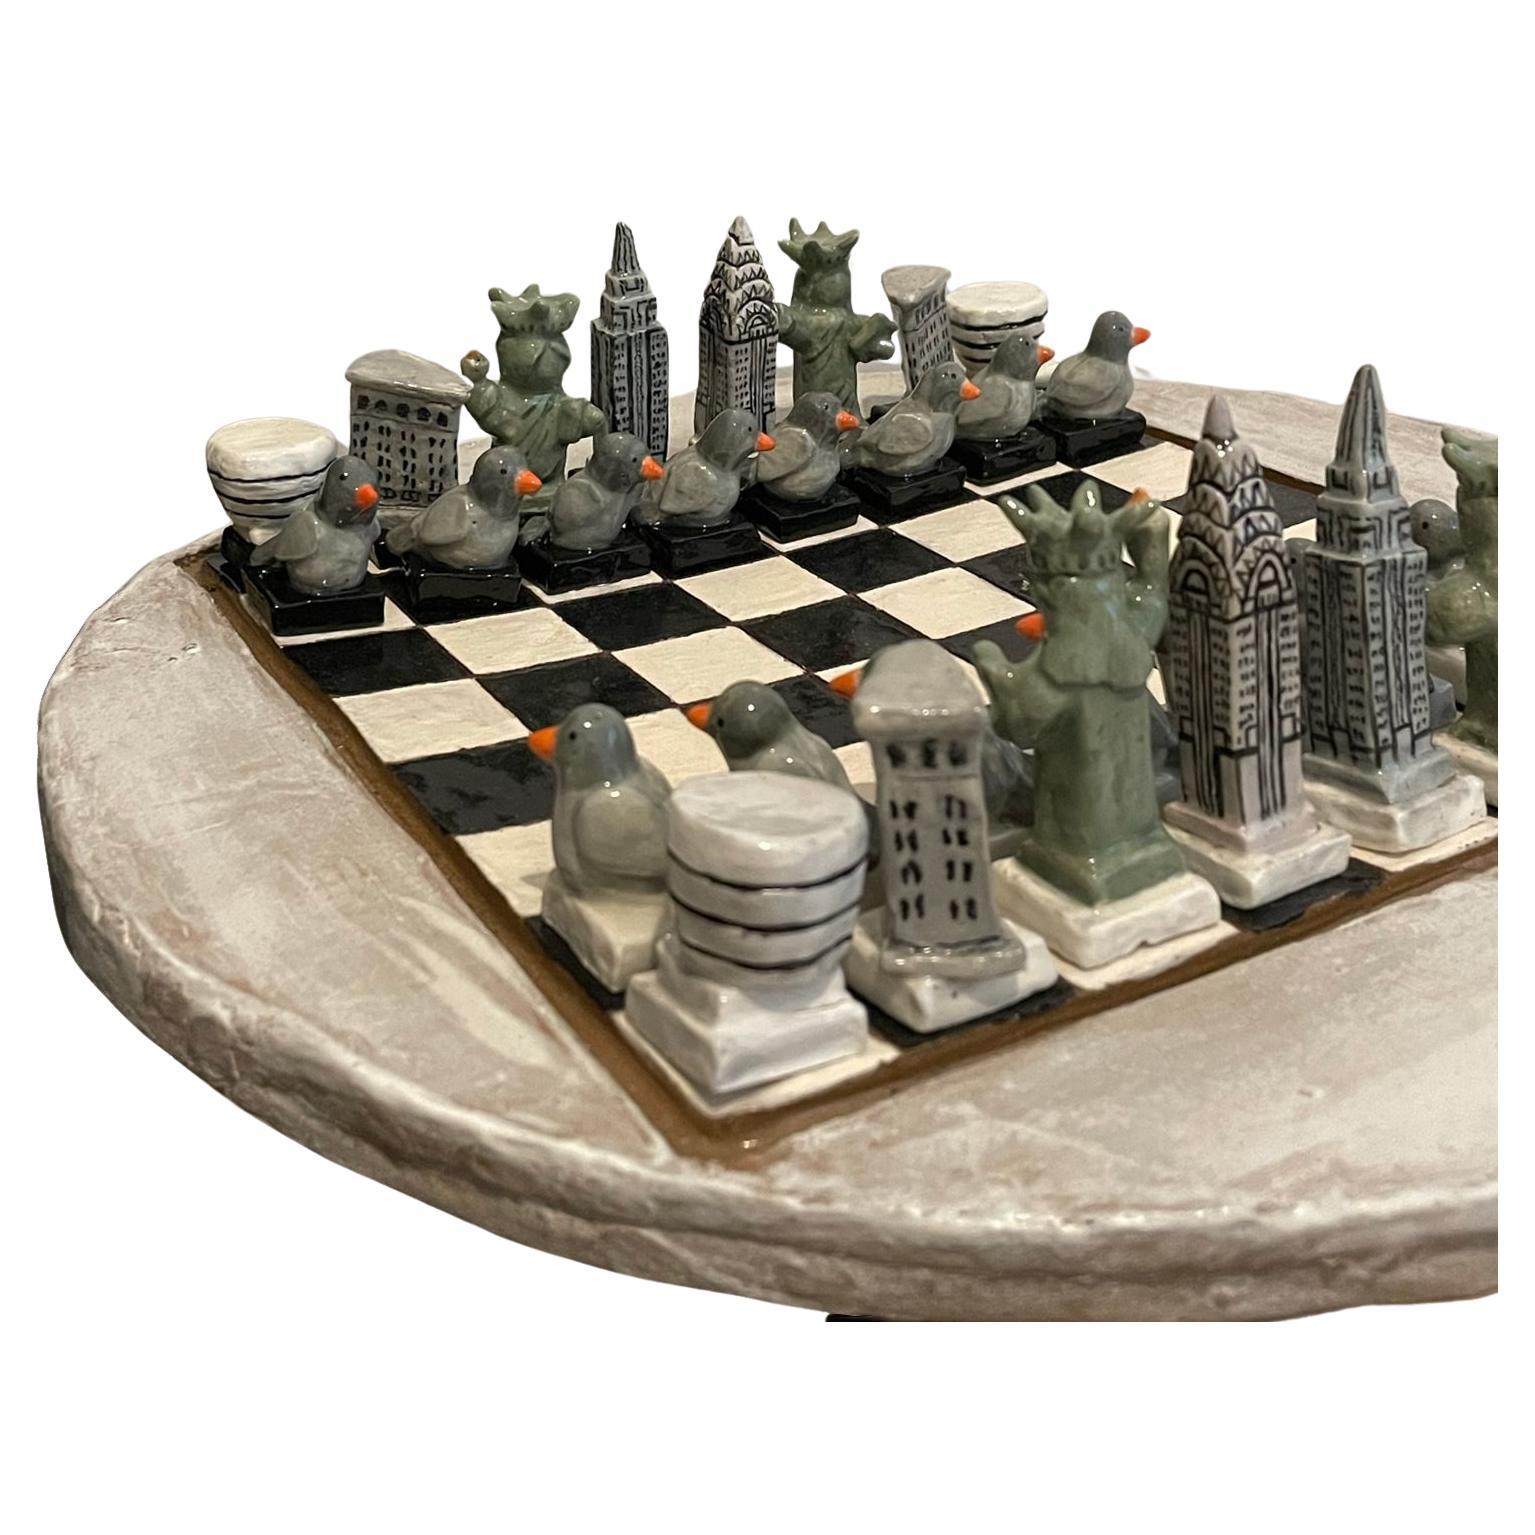 Introducing the NYC Skyline Chess Set: a finely crafted homage to the city that never sleeps. Each of the 32 ceramic pieces is unique and meticulously handcrafted from clay and glazed for a polished finish. 

In this set, Manhattan's icons represent